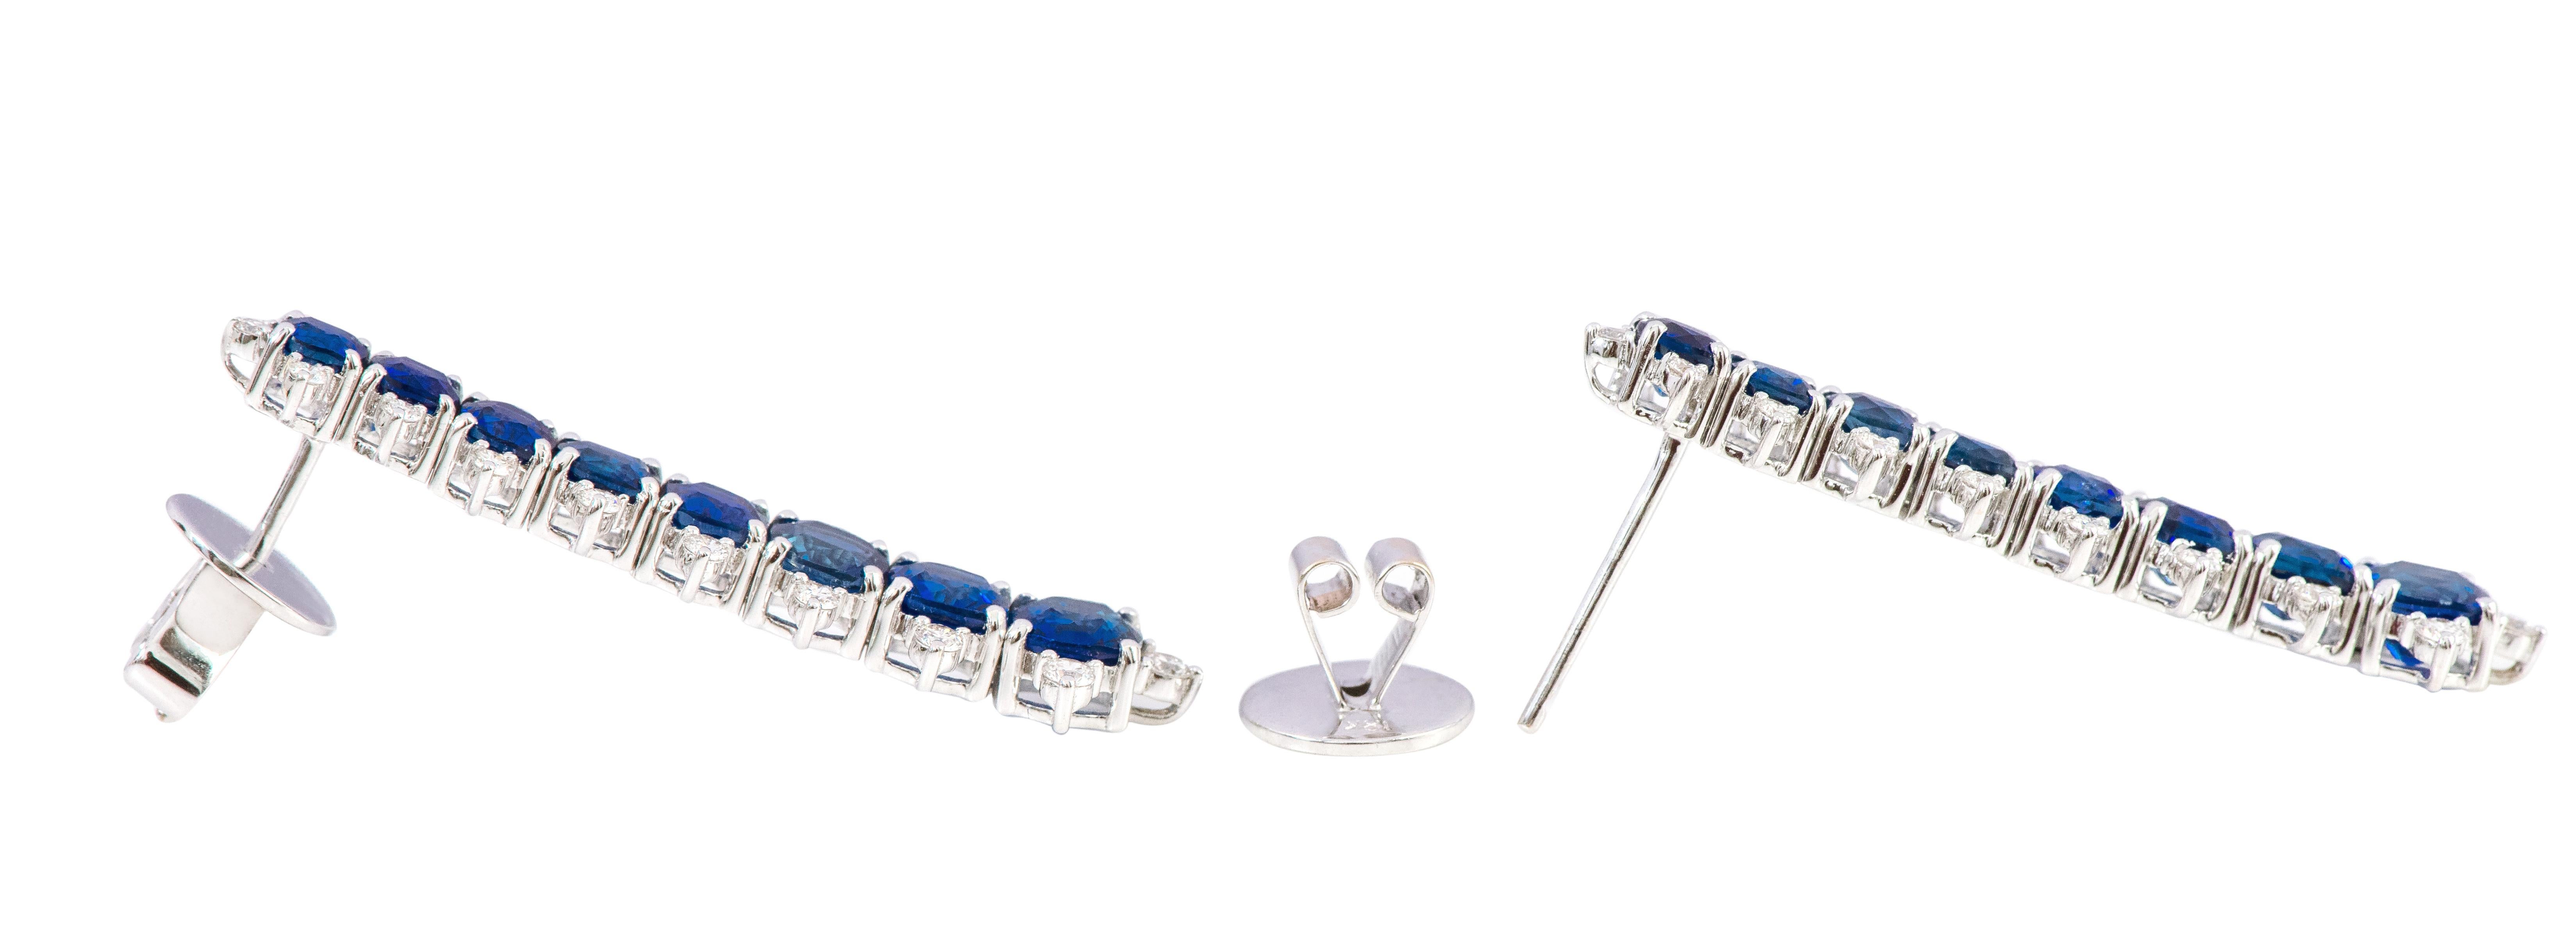 18 Karat White Gold 7.90 Carat Sapphire and Diamond Dangle Earrings

This marvelous vivid blue sapphire and diamond long earring is mesmerizing. The perfect graduating cushion cut sapphires form the long look of the earring with round diamonds on